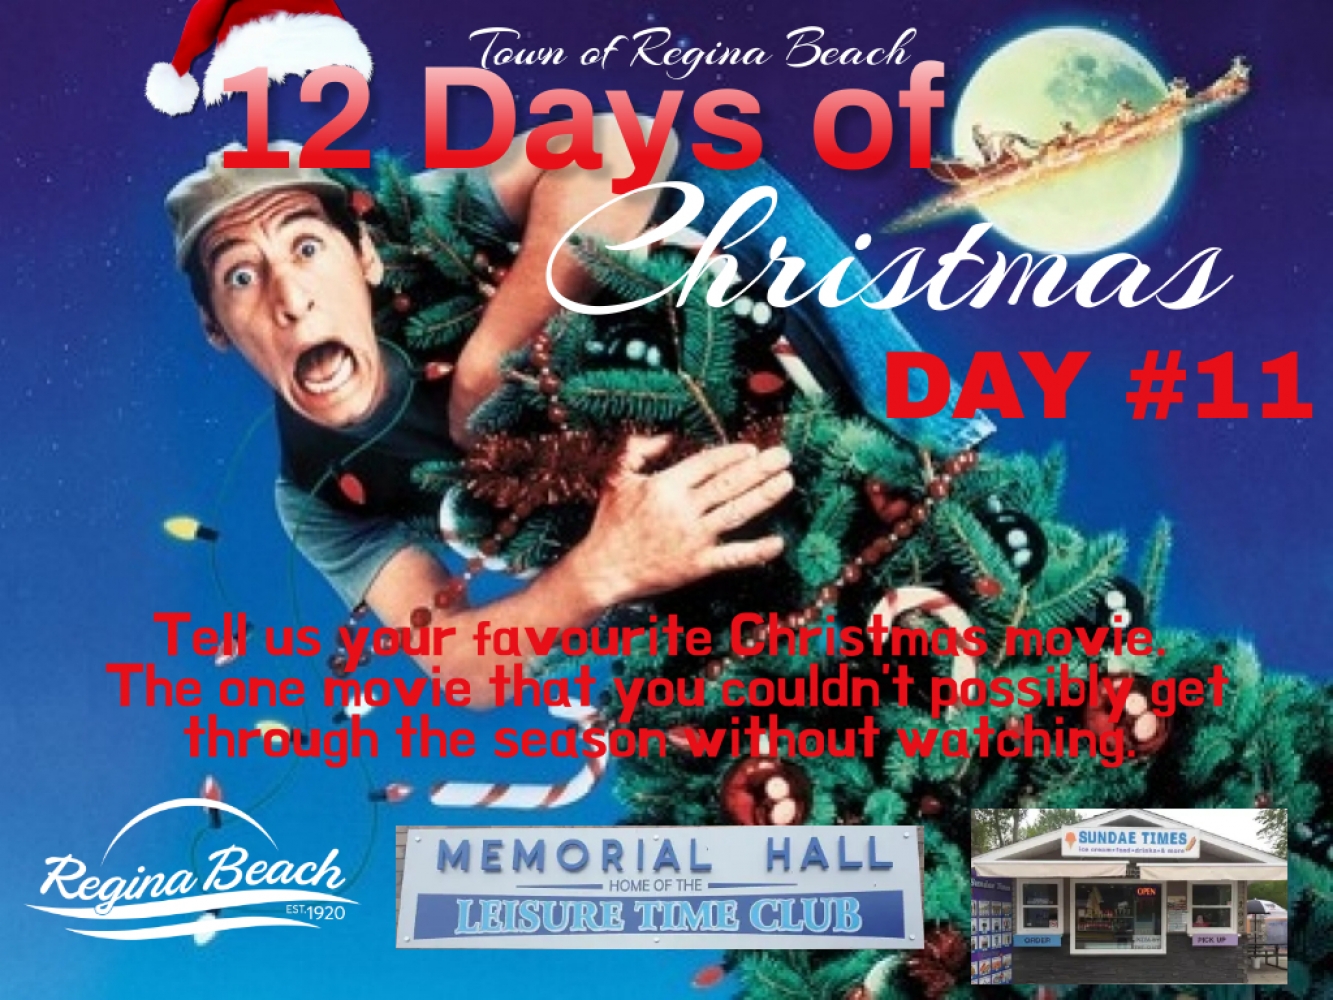 Day #11 of Our 12 Days of Christmas